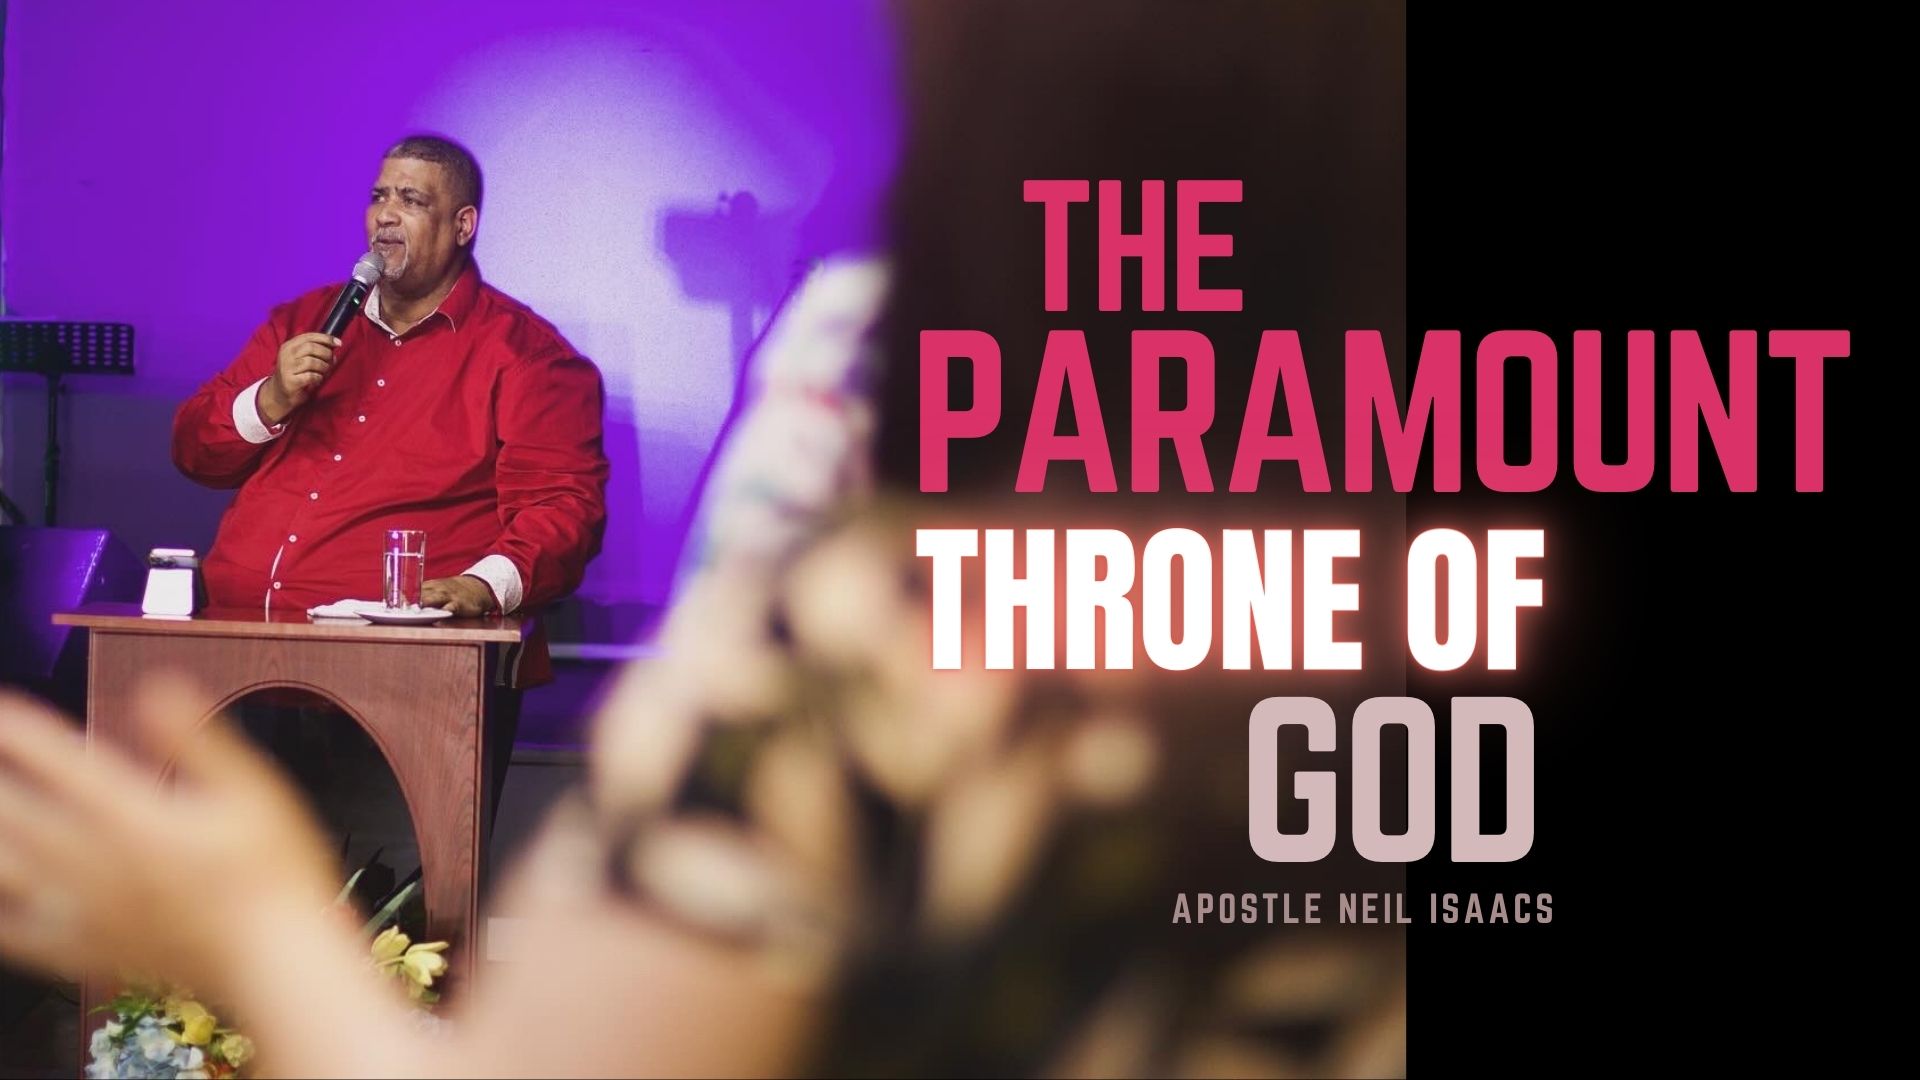 The Paramount Throne Of God And His Kingdom of Dominion and Rule